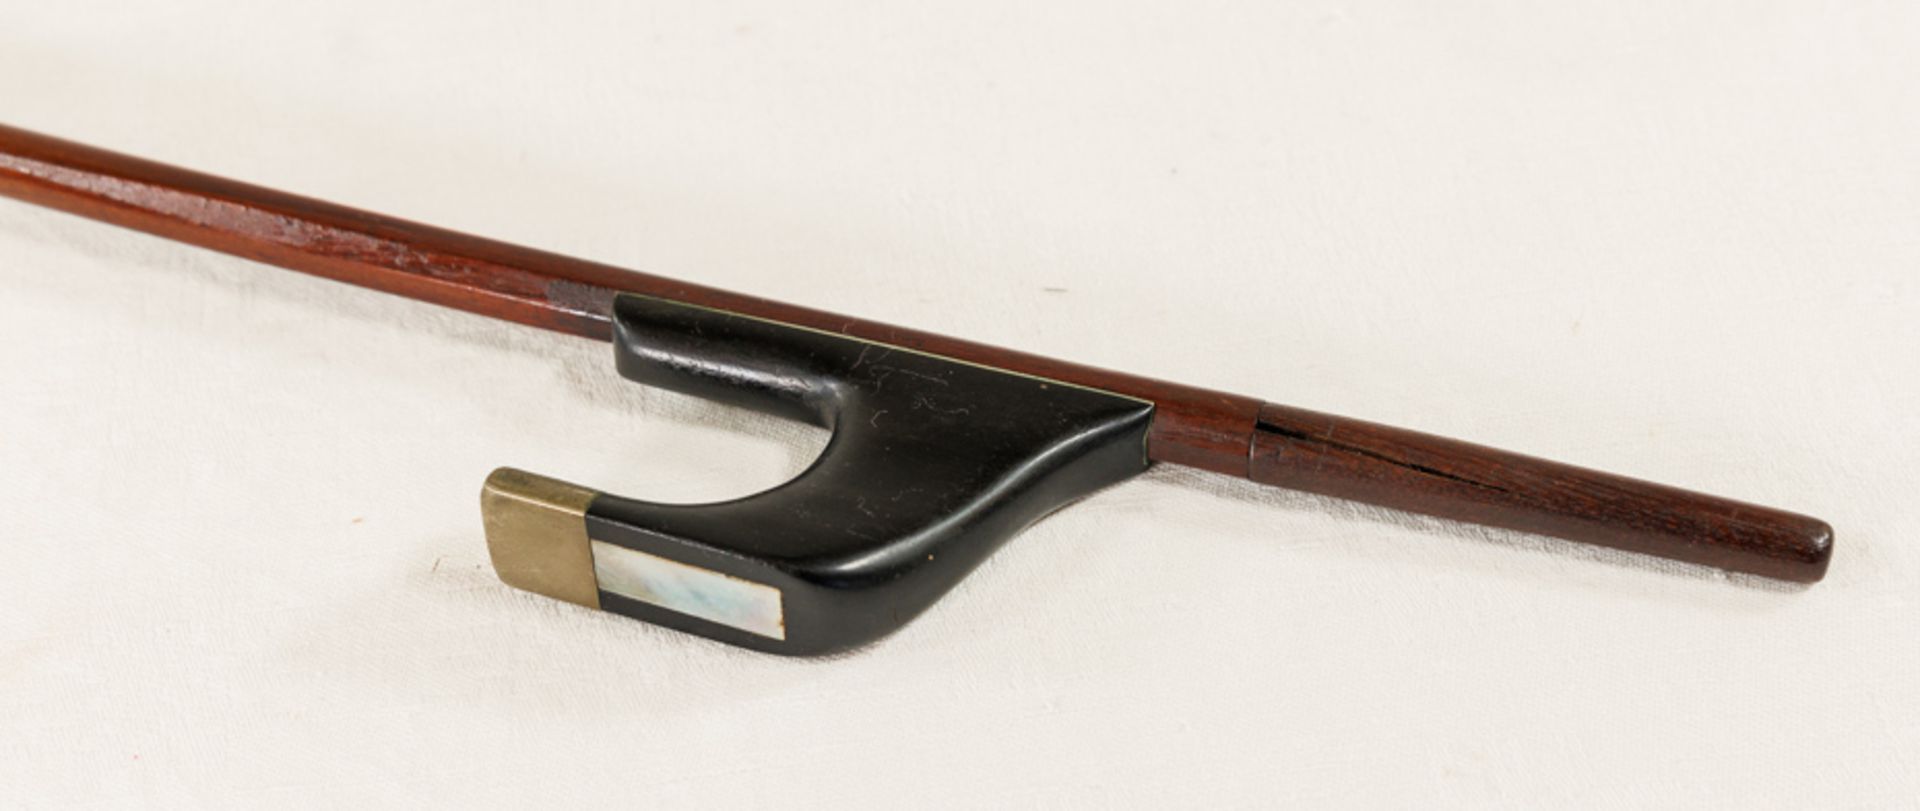 DOUBLE BASS BOW “EXPION” BY EMILE AUGUSTE OUCHARD ET FILS - Image 2 of 6